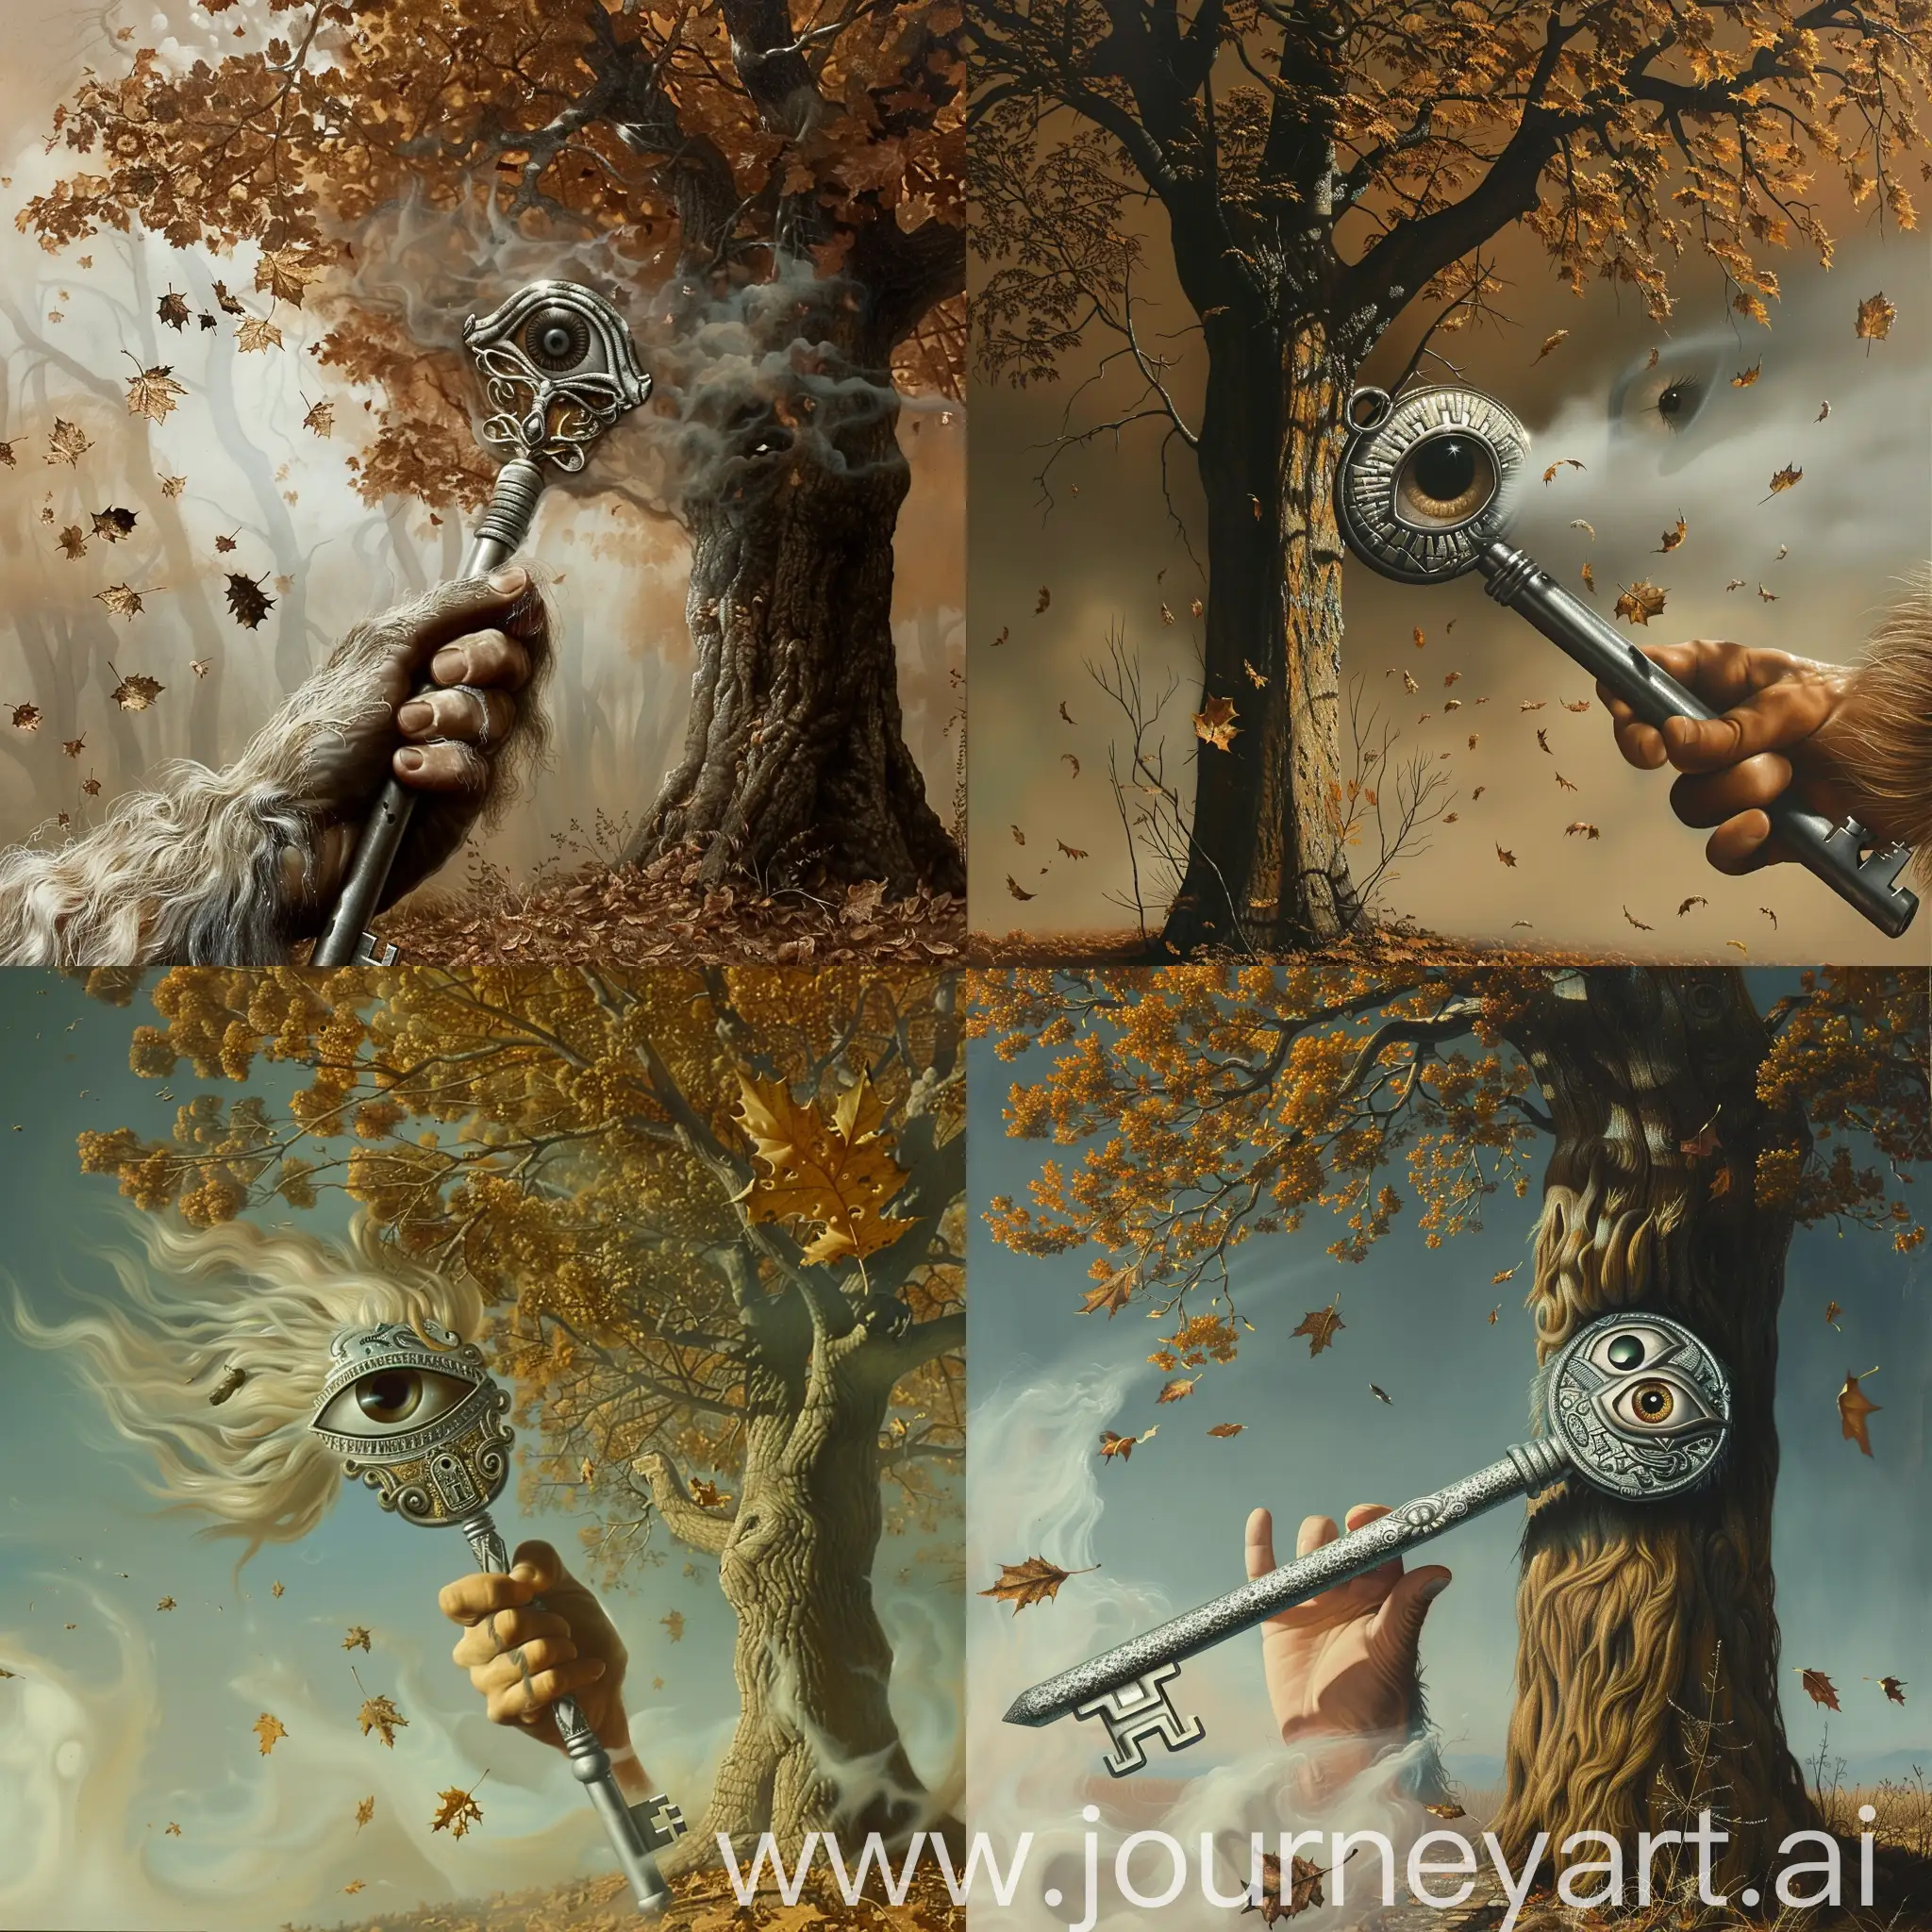 in the style of a painting by salvador dali, a hairy hand holding a huge silver key with an egyptian eye, mist is floating, in the background there is an oak tree with brown leaves falling off like it is in the autumn